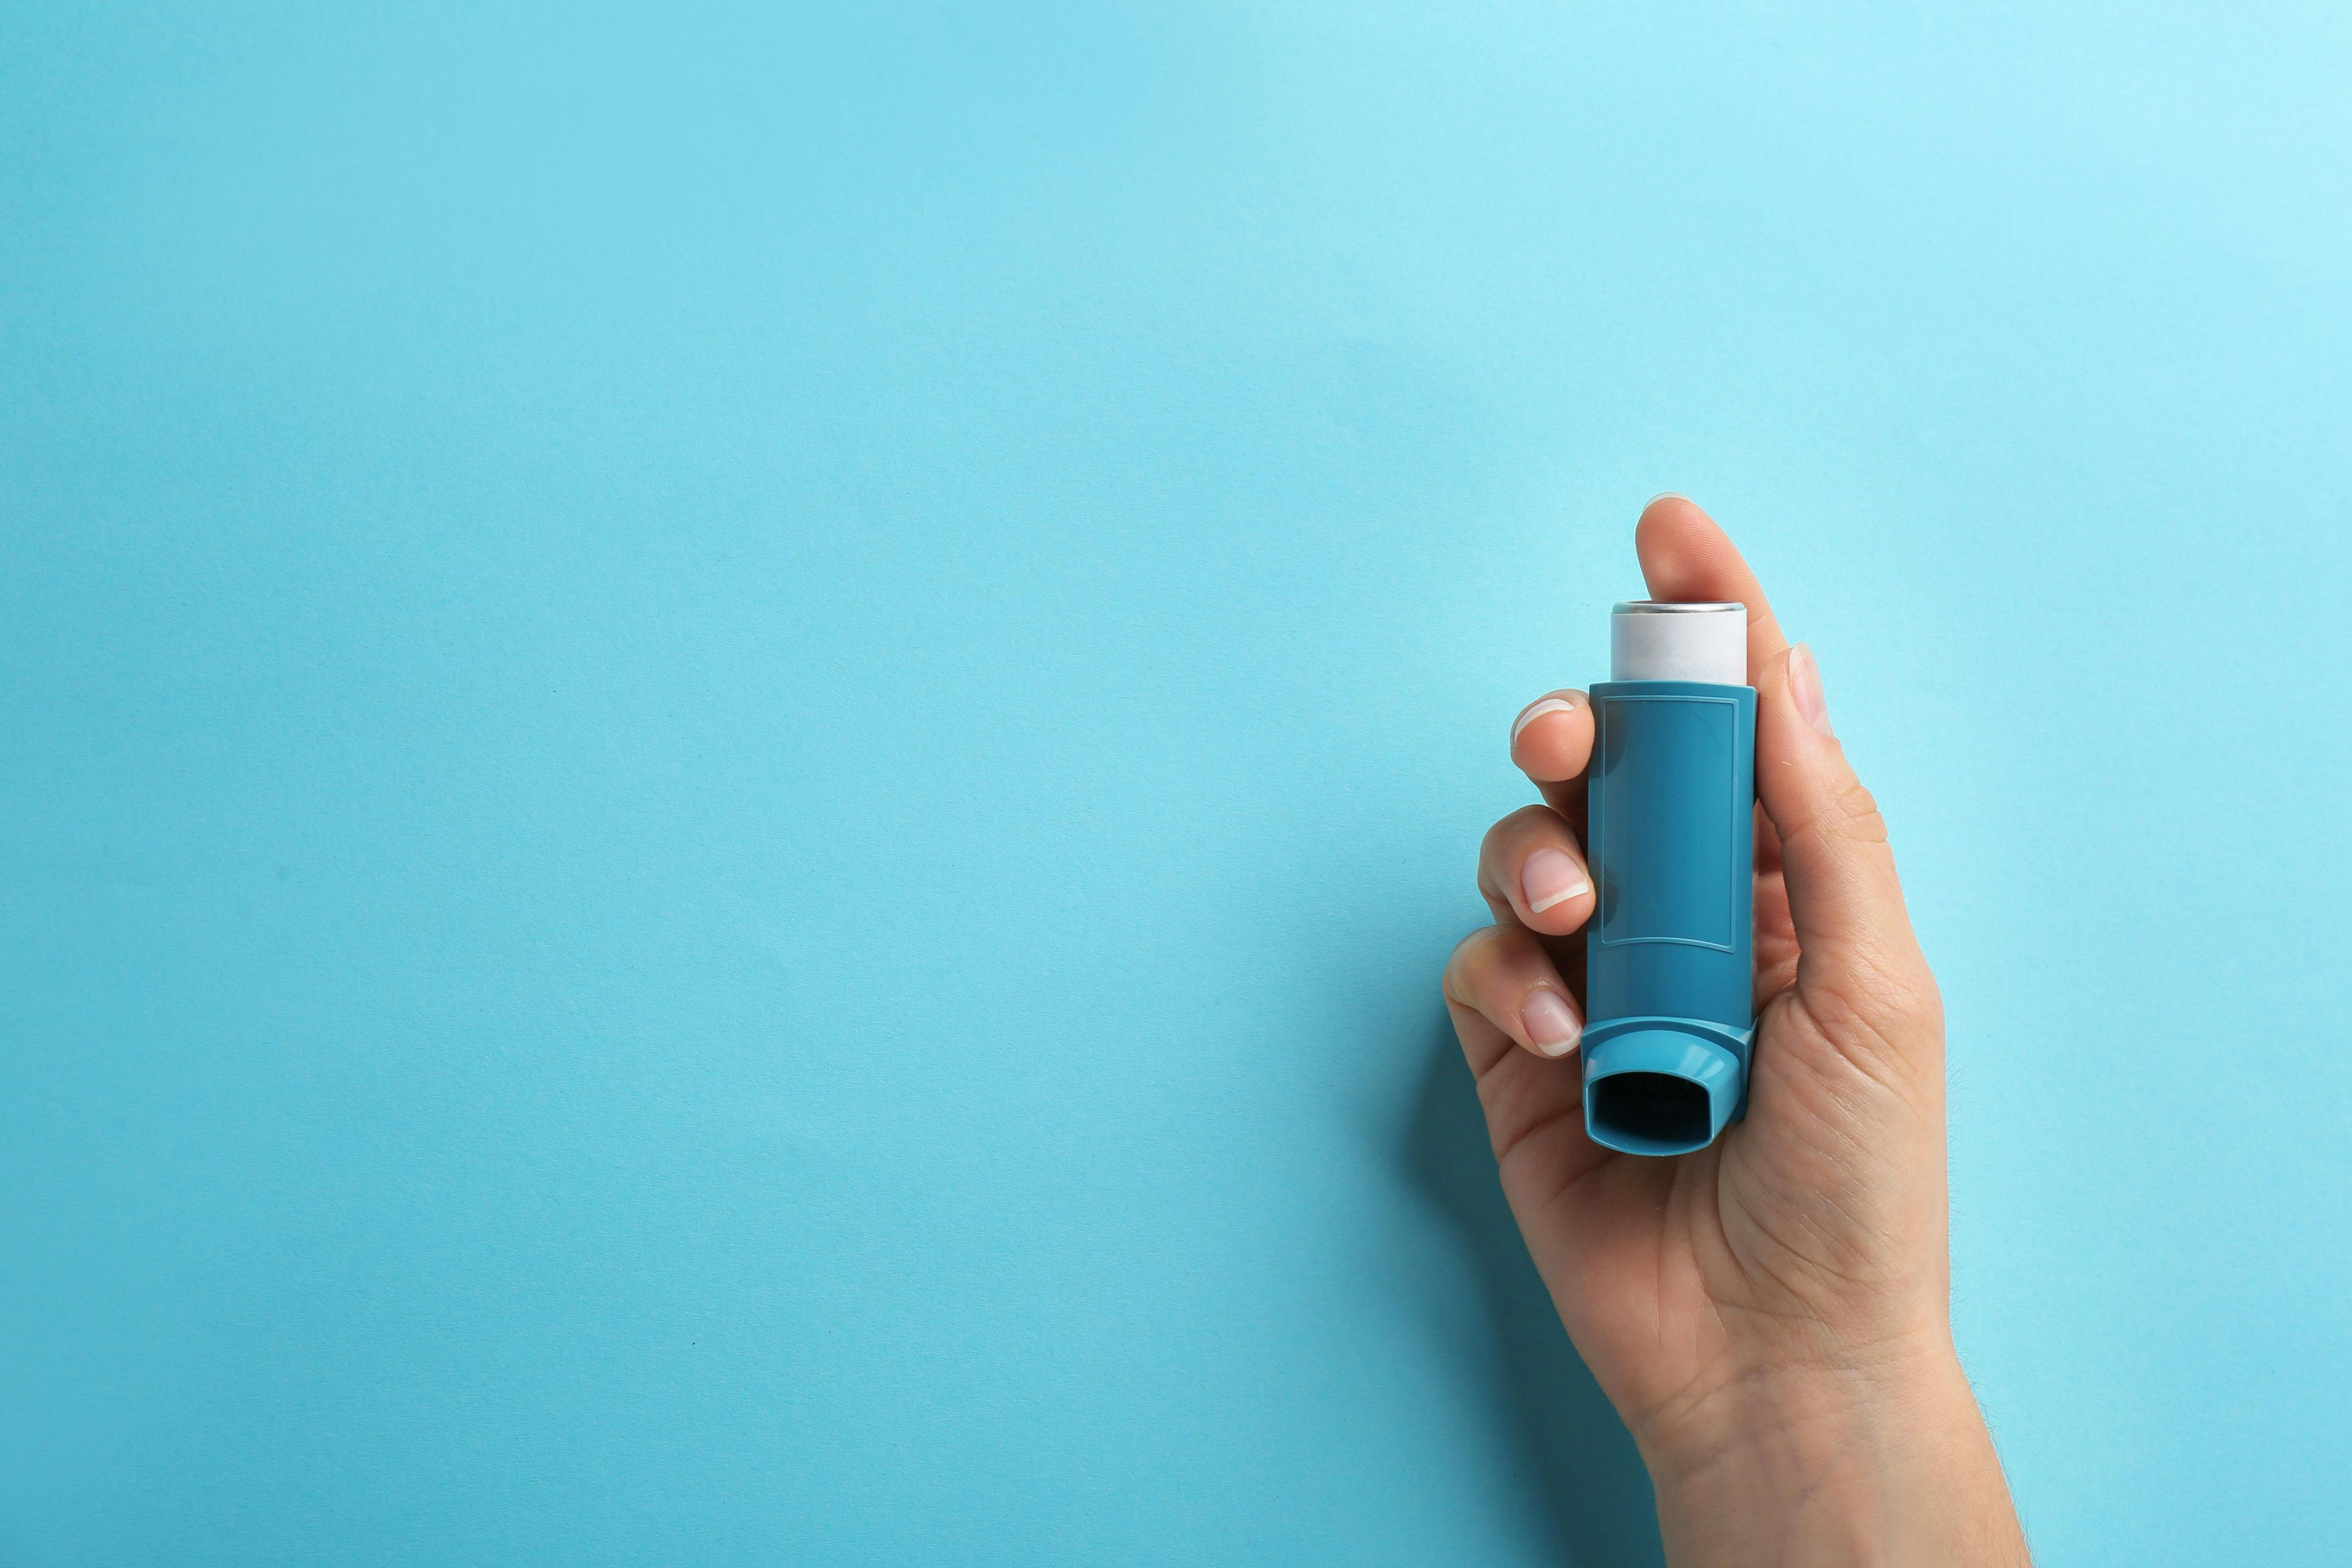 Many Patients With COPD Have Poor Adherence to Long-Acting Inhalers